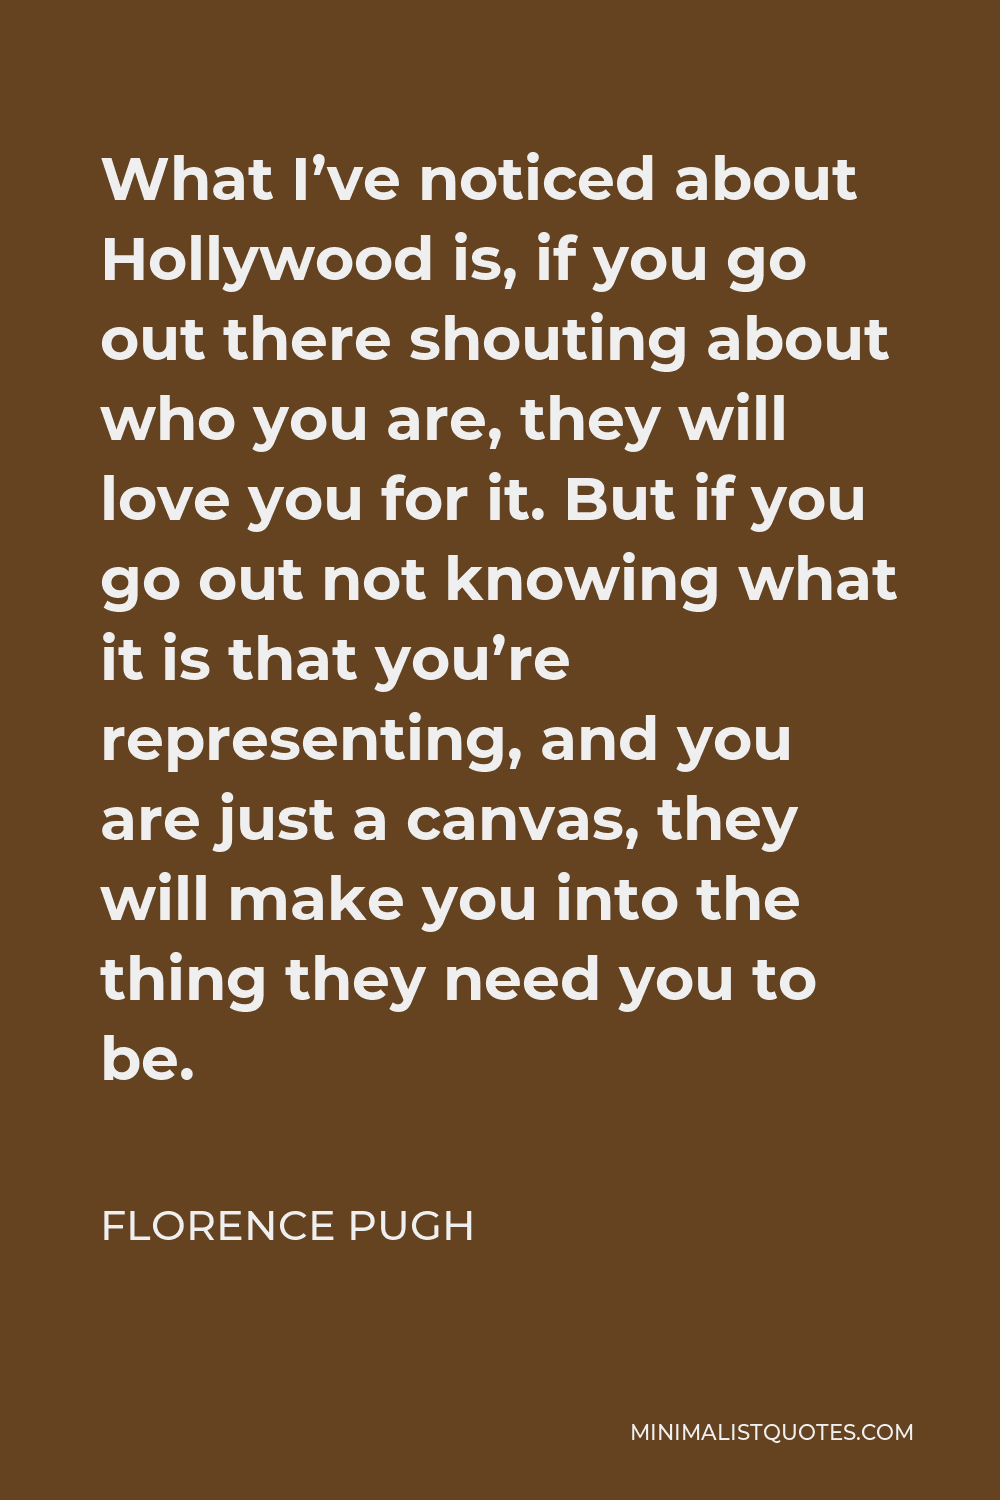 Florence Pugh Quote - What I’ve noticed about Hollywood is, if you go out there shouting about who you are, they will love you for it. But if you go out not knowing what it is that you’re representing, and you are just a canvas, they will make you into the thing they need you to be.